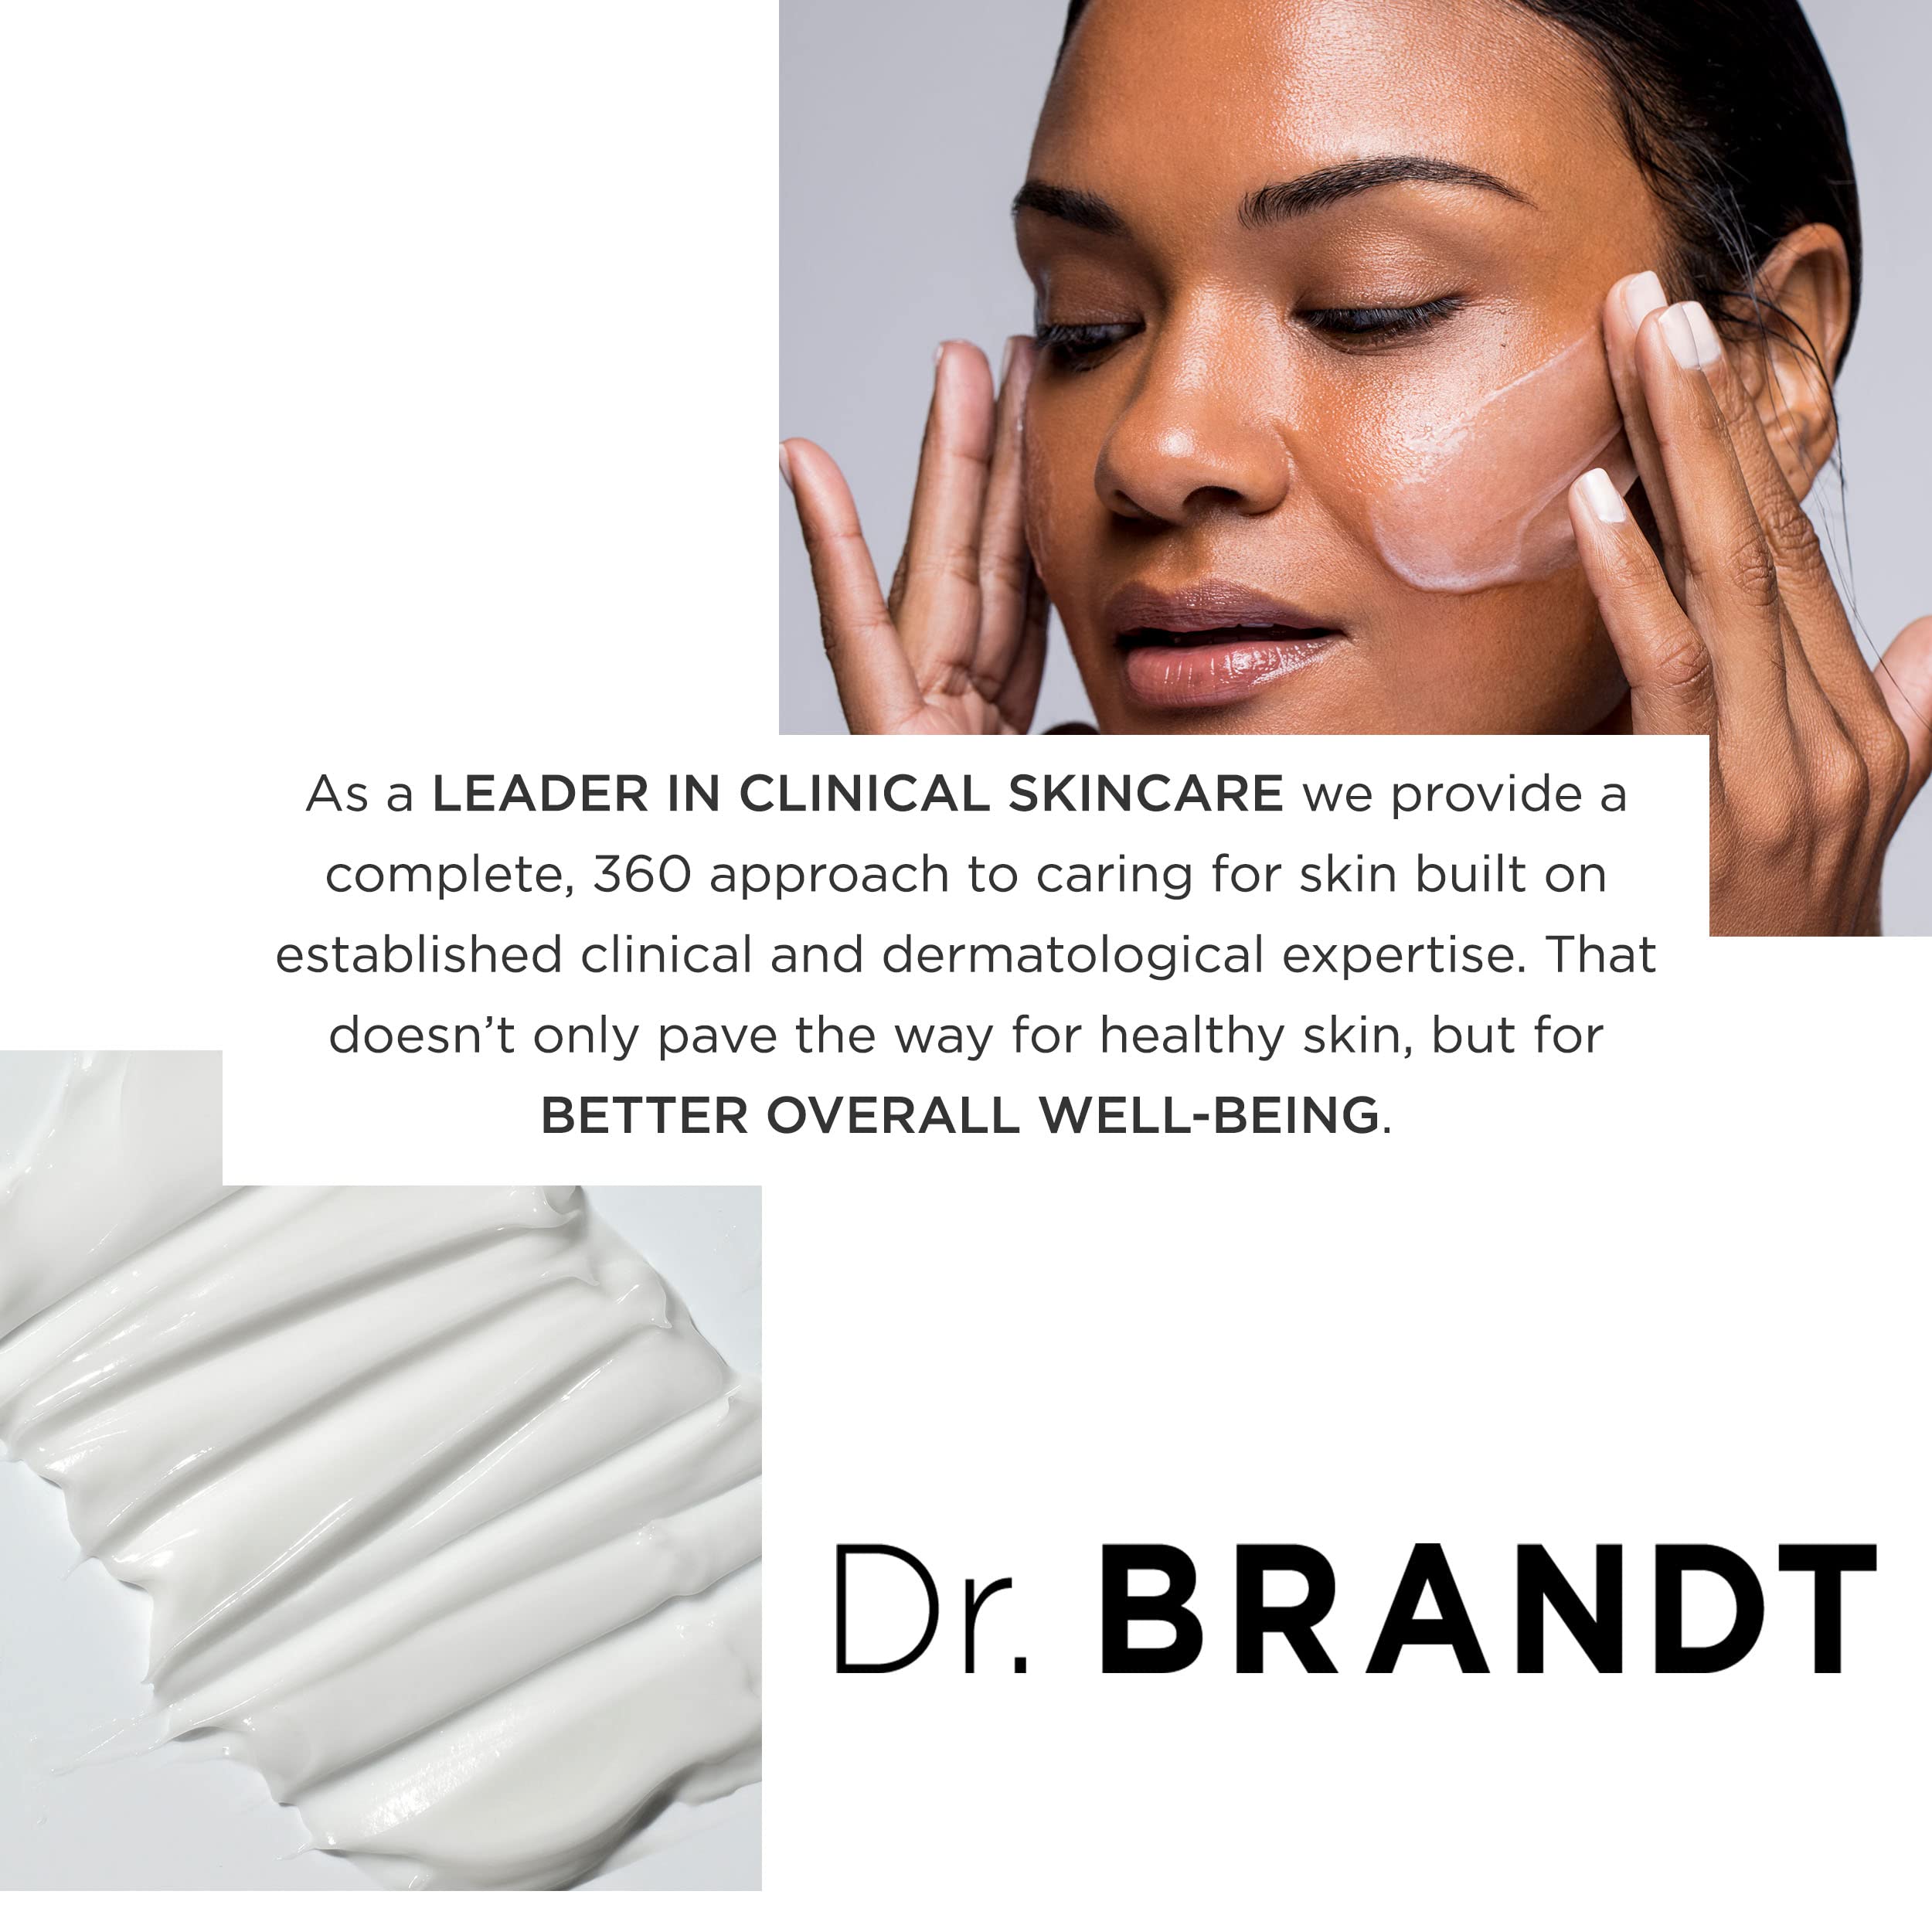 Dr. Brandt Cleanser. Pores No More Pore Purifying Cleanser. Non-Drying, Pore-Refining Cleaner with Salicylic Acid and Tea Tree Oil. Dissolves Impurities, Eliminates Excess Oil and Residue, 3.5 fl oz.